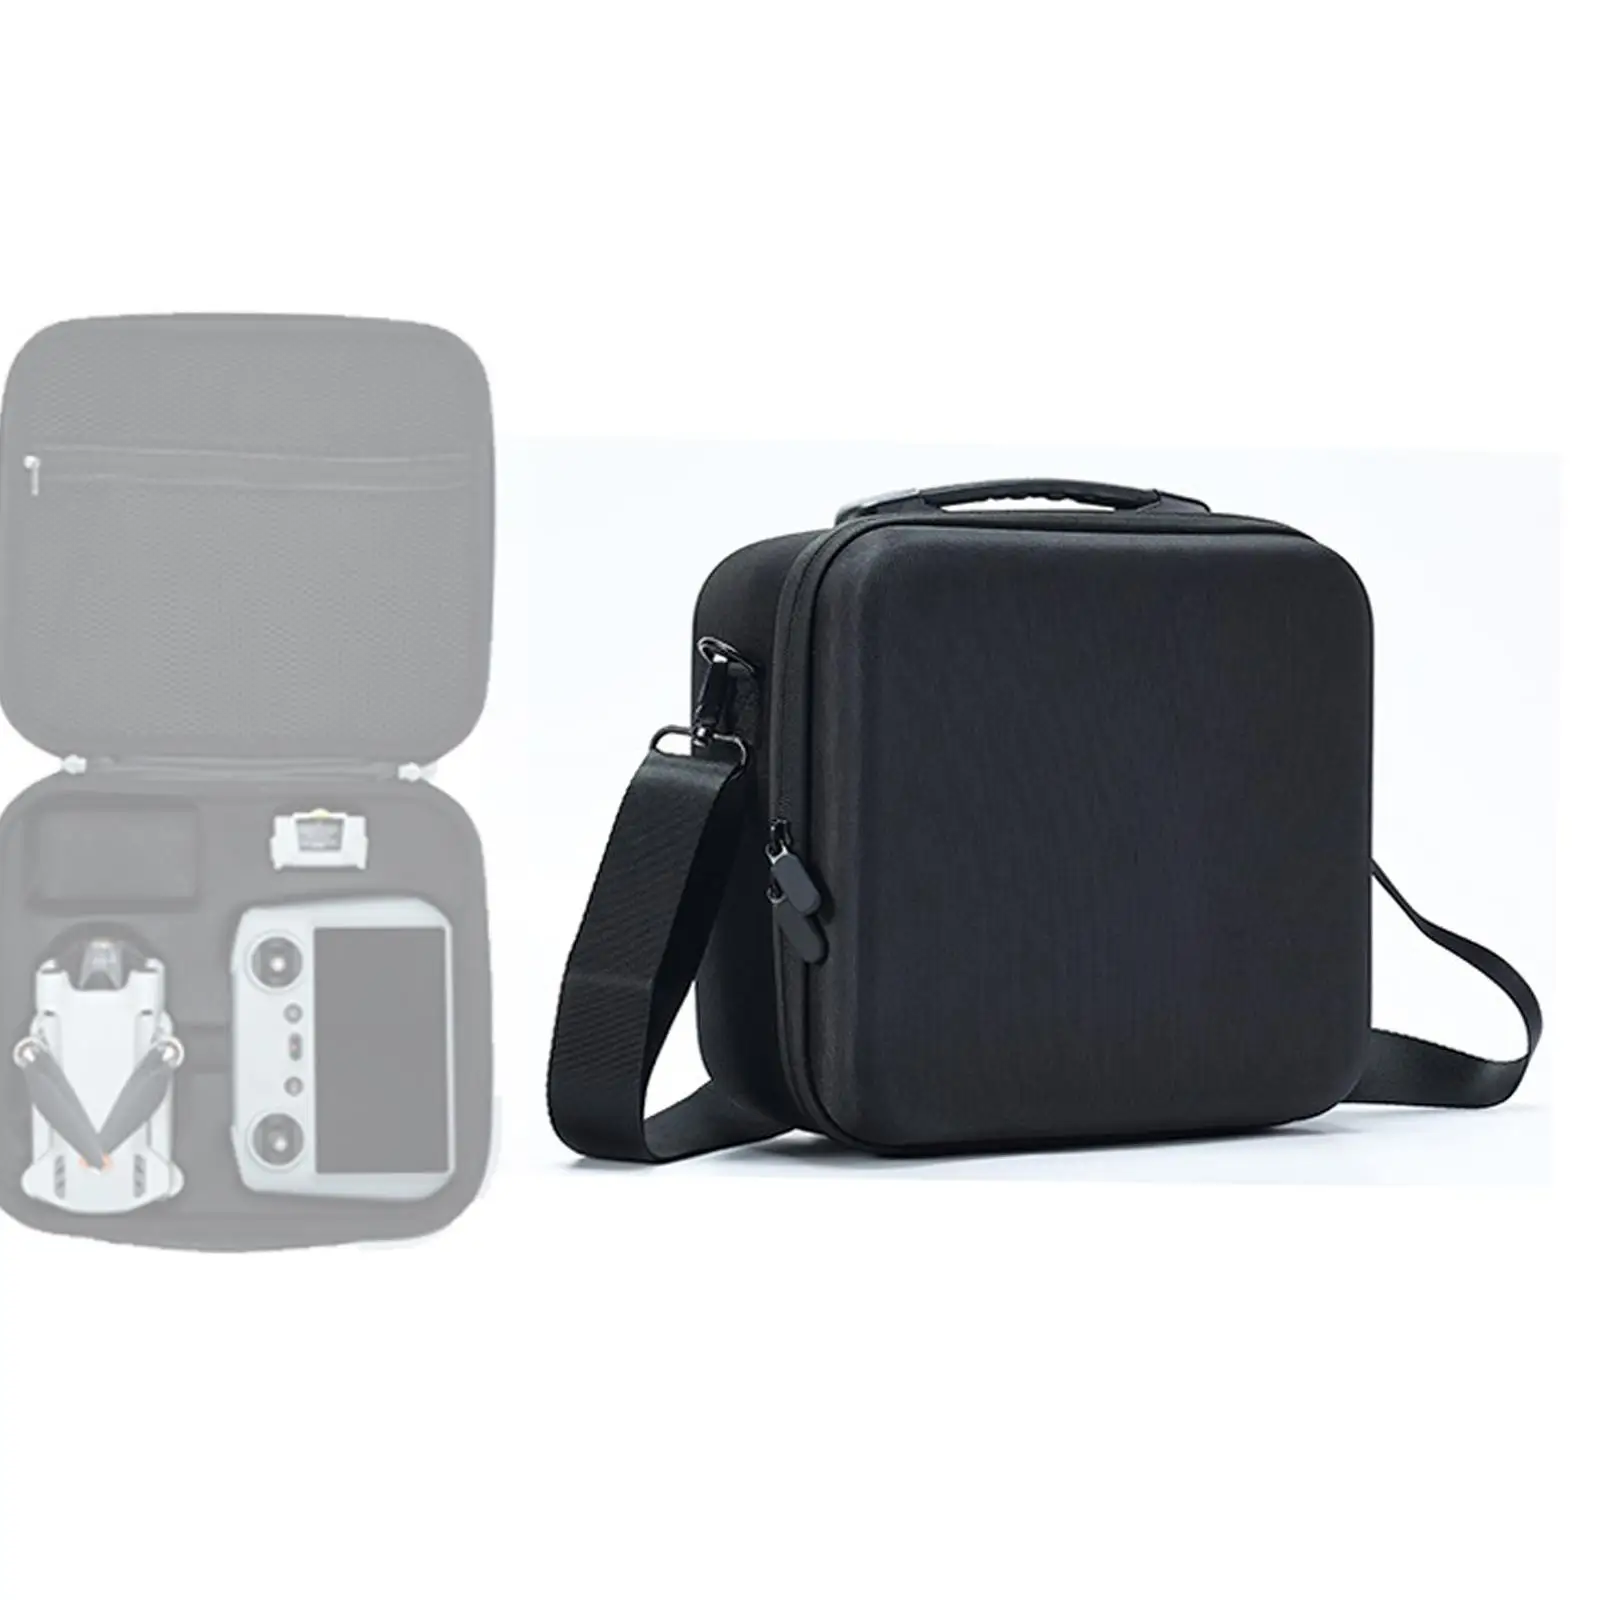 Mini Carrying Case Protective Storage Bag Shockproof Outdoor Travel Case Handbag for DJI Mini 3 Pro Drone Quadcopter Accs